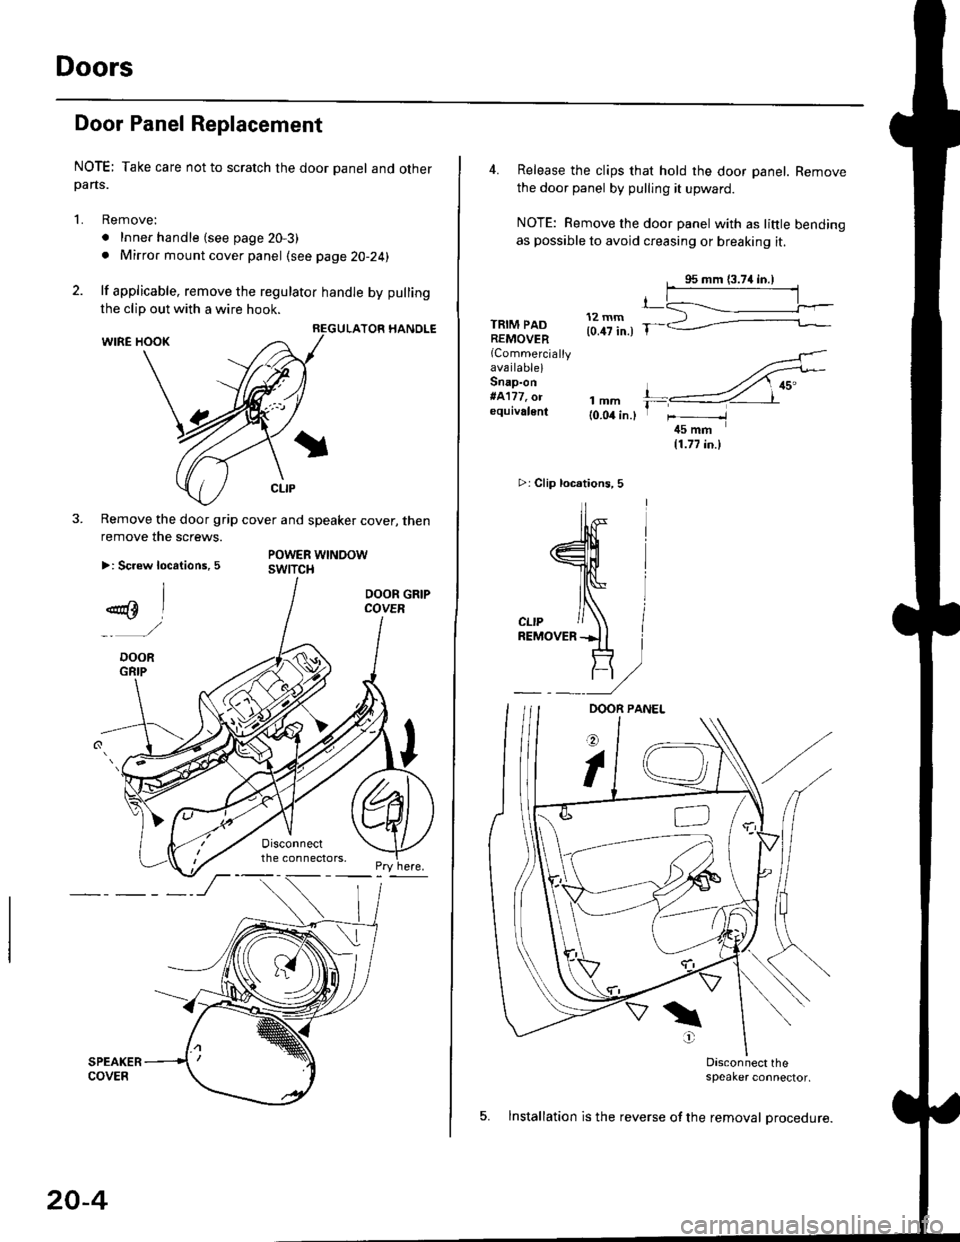 HONDA CIVIC 1996 6.G Workshop Manual Doors
Door Panel Replacement
NOTE; Take care not to scratch the door panel and otherpans.
1. Remove:
. Inner handle (see page 20-3)
. Mirror mount cover panel (see page 20-24)
2. lf applicable, remove